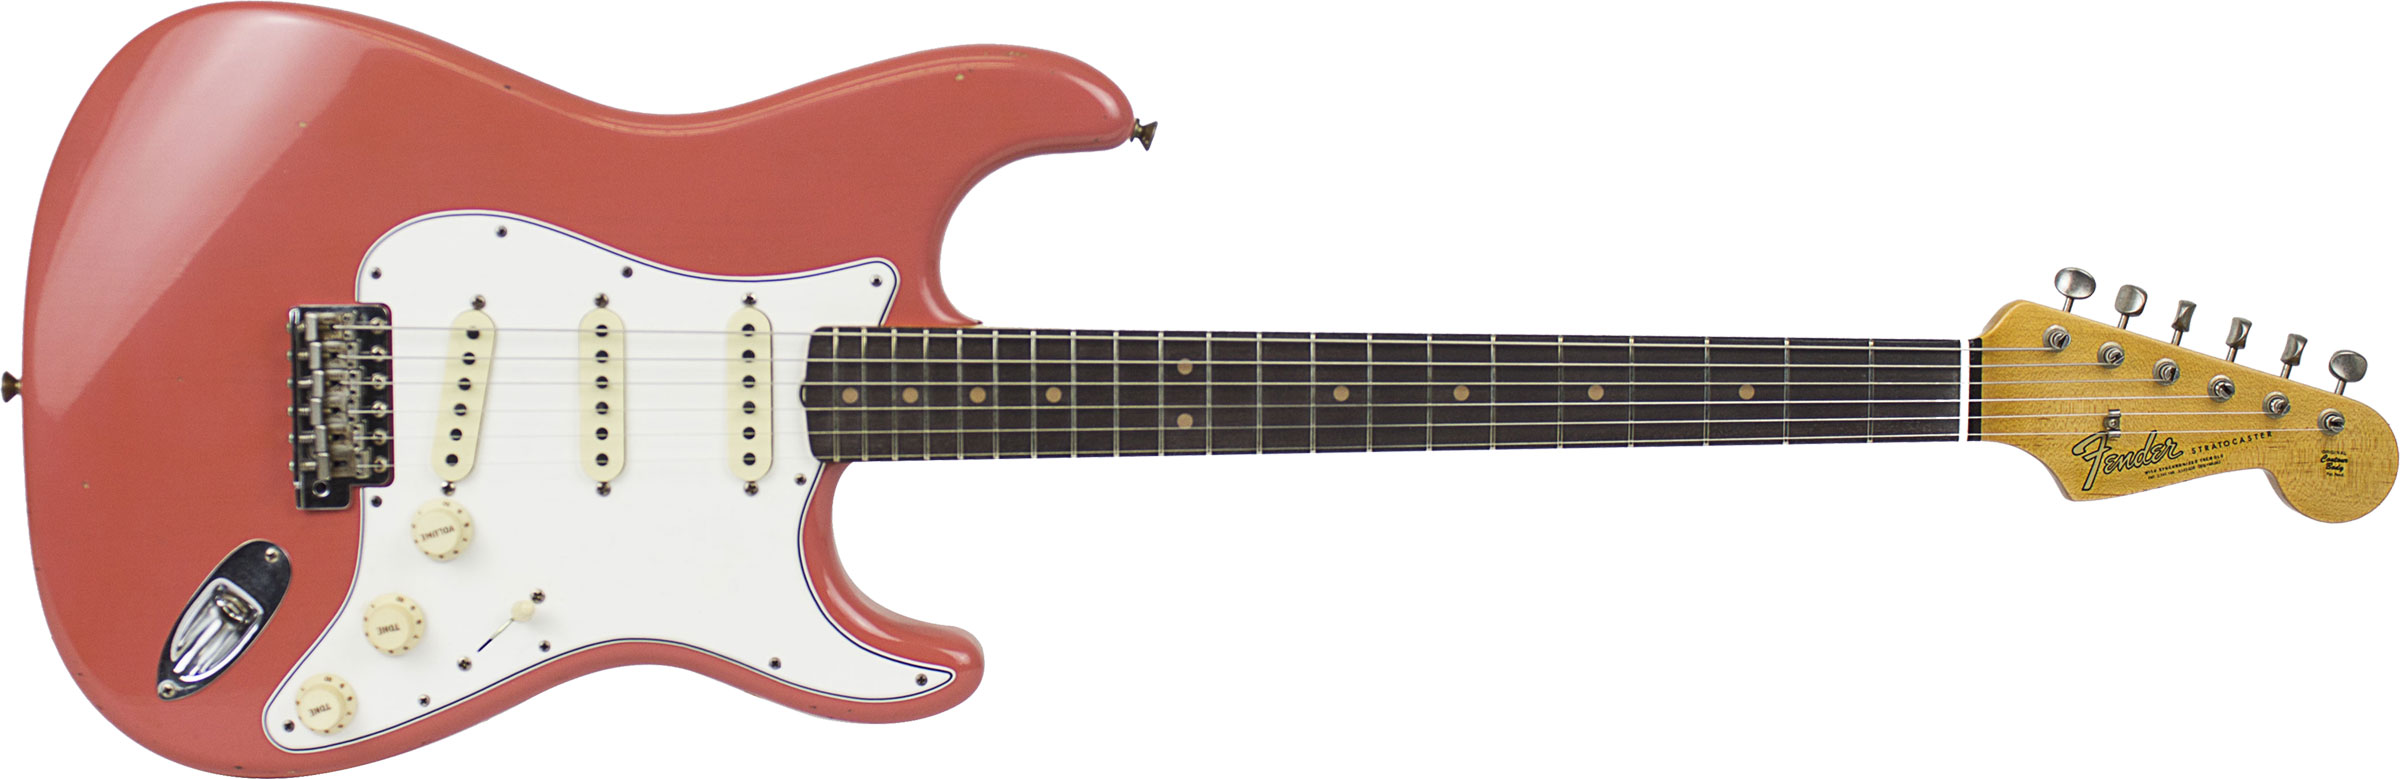 GUITARRA FENDER 64 STRATOCASTER JOURNEYMAN RELIC LTD EDITION 923-5000-516 S.FADED AGED F.RED